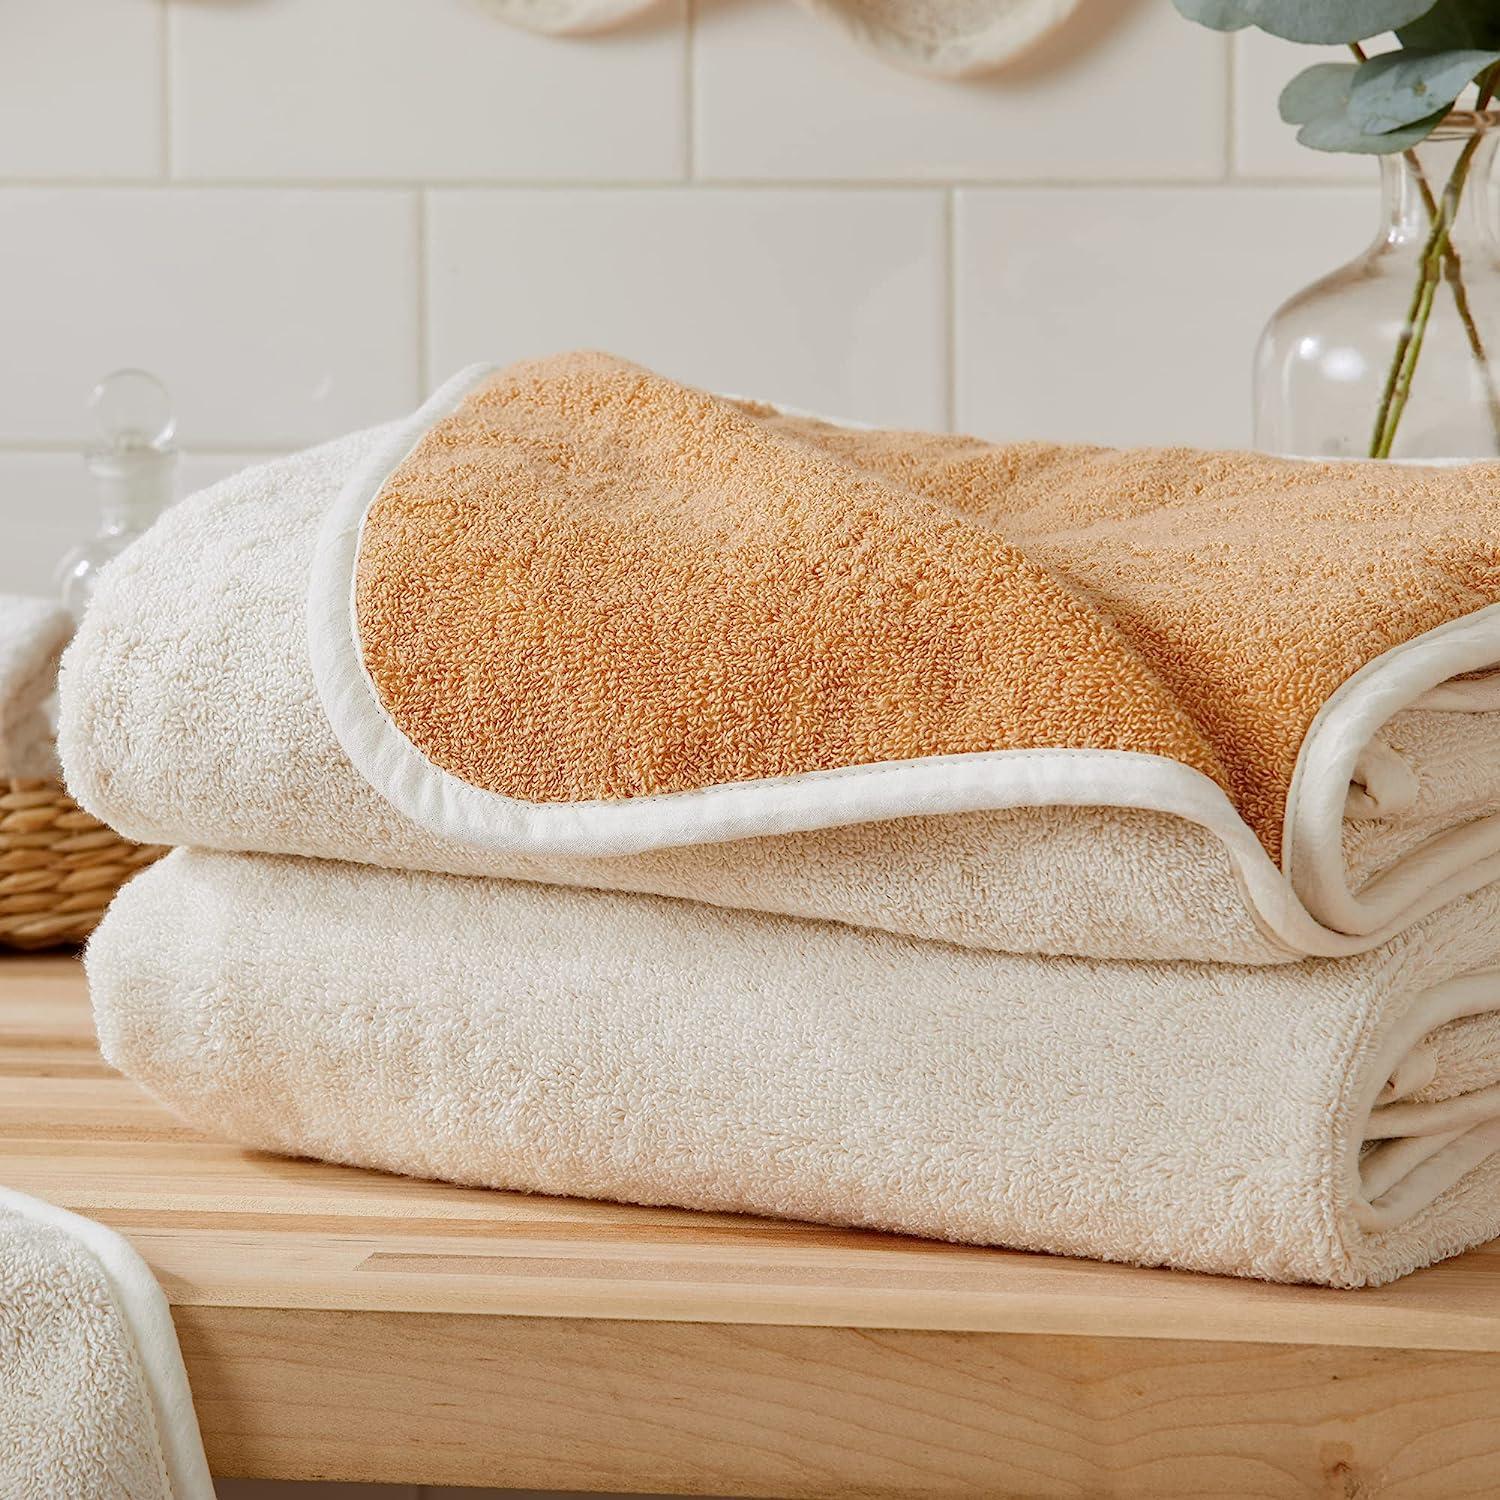 5-Pack 100% Cotton Extra Plush & Absorbent Bath Towels - On Sale